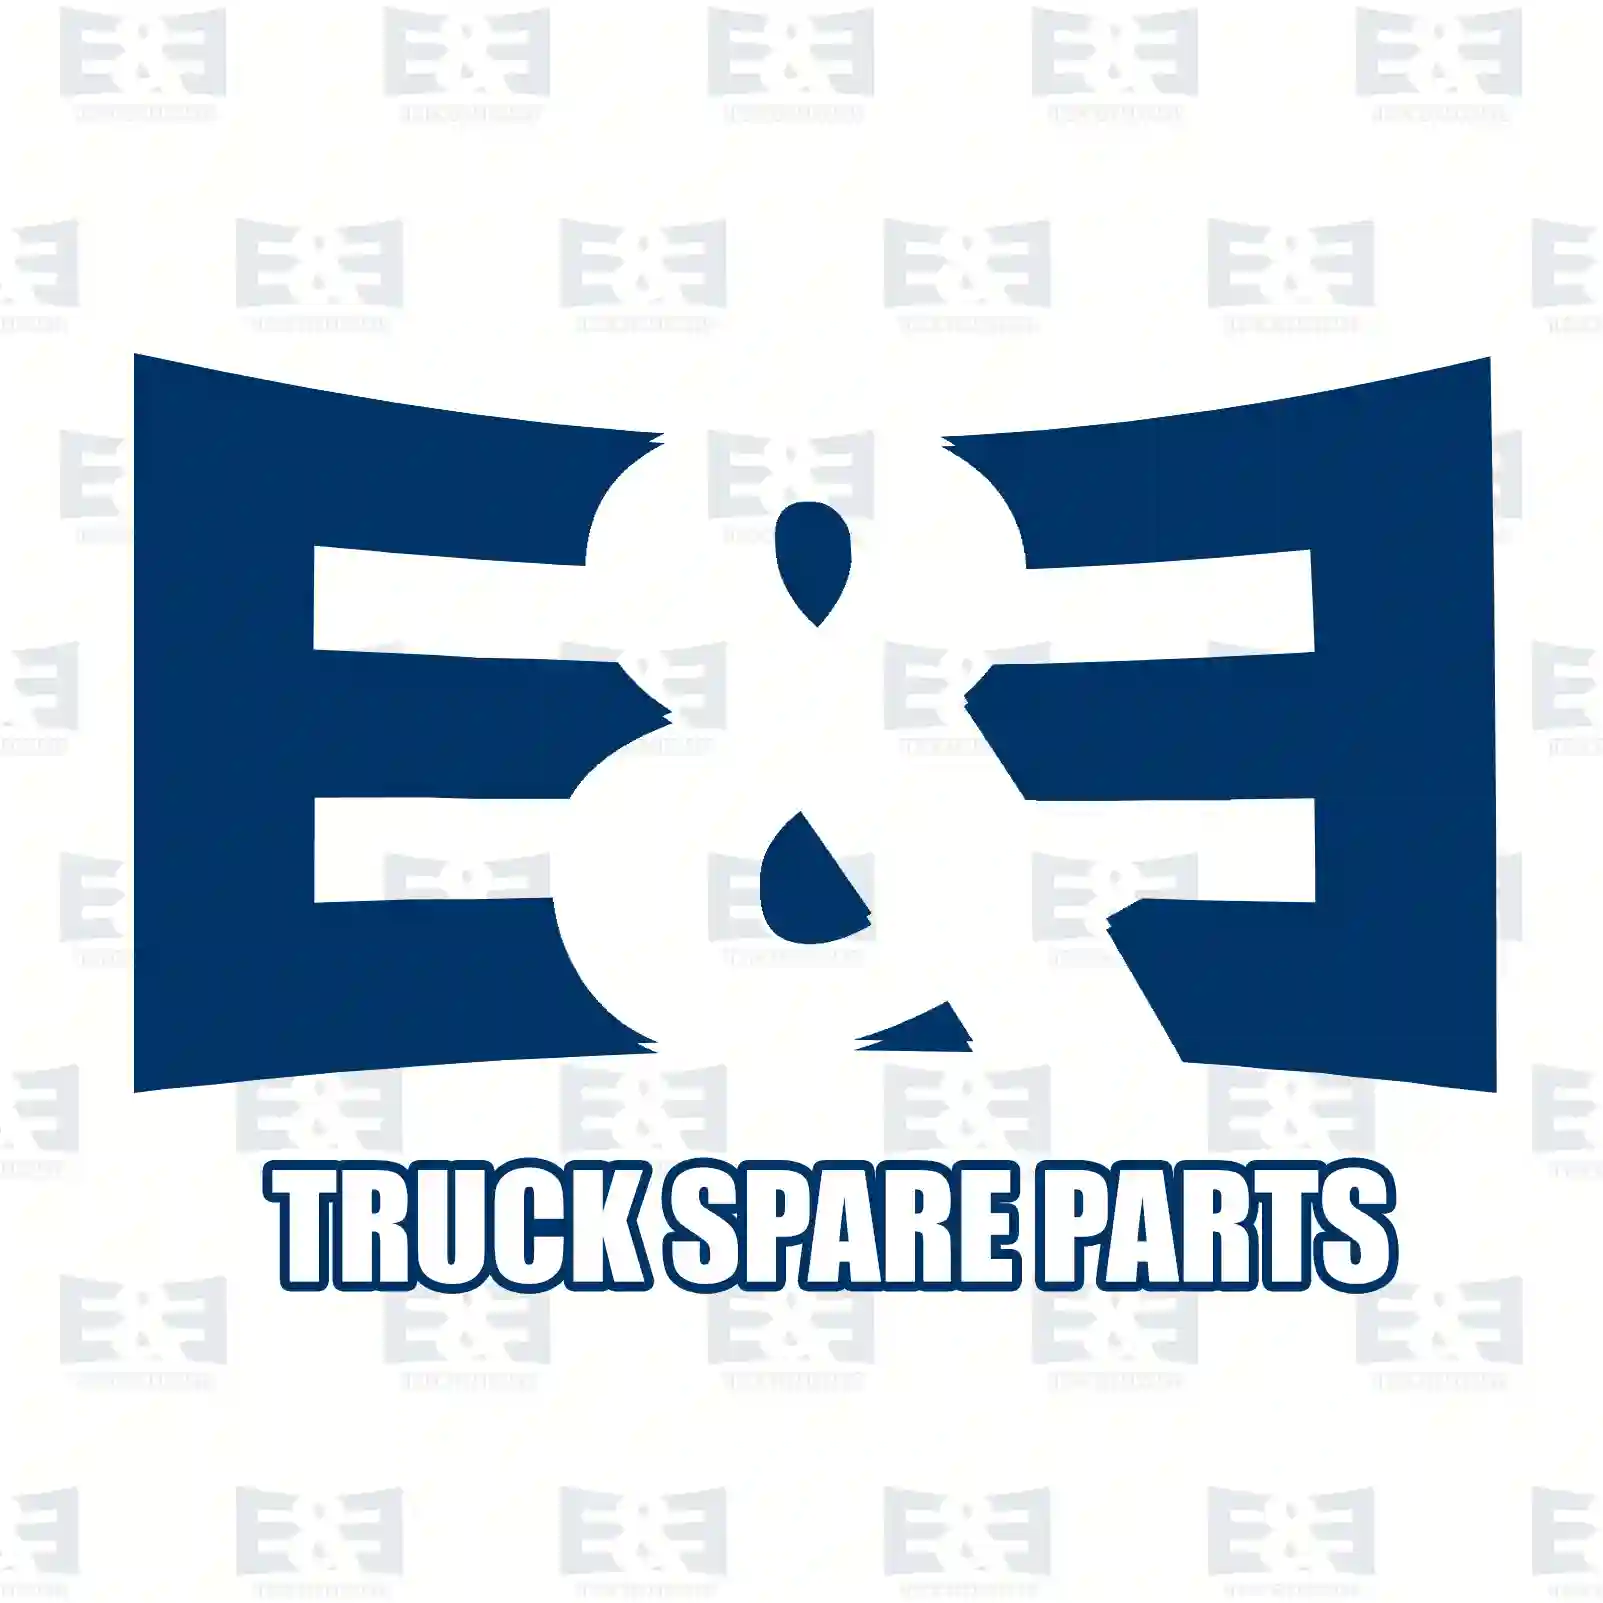  Socket wrench || E&E Truck Spare Parts | Truck Spare Parts, Auotomotive Spare Parts